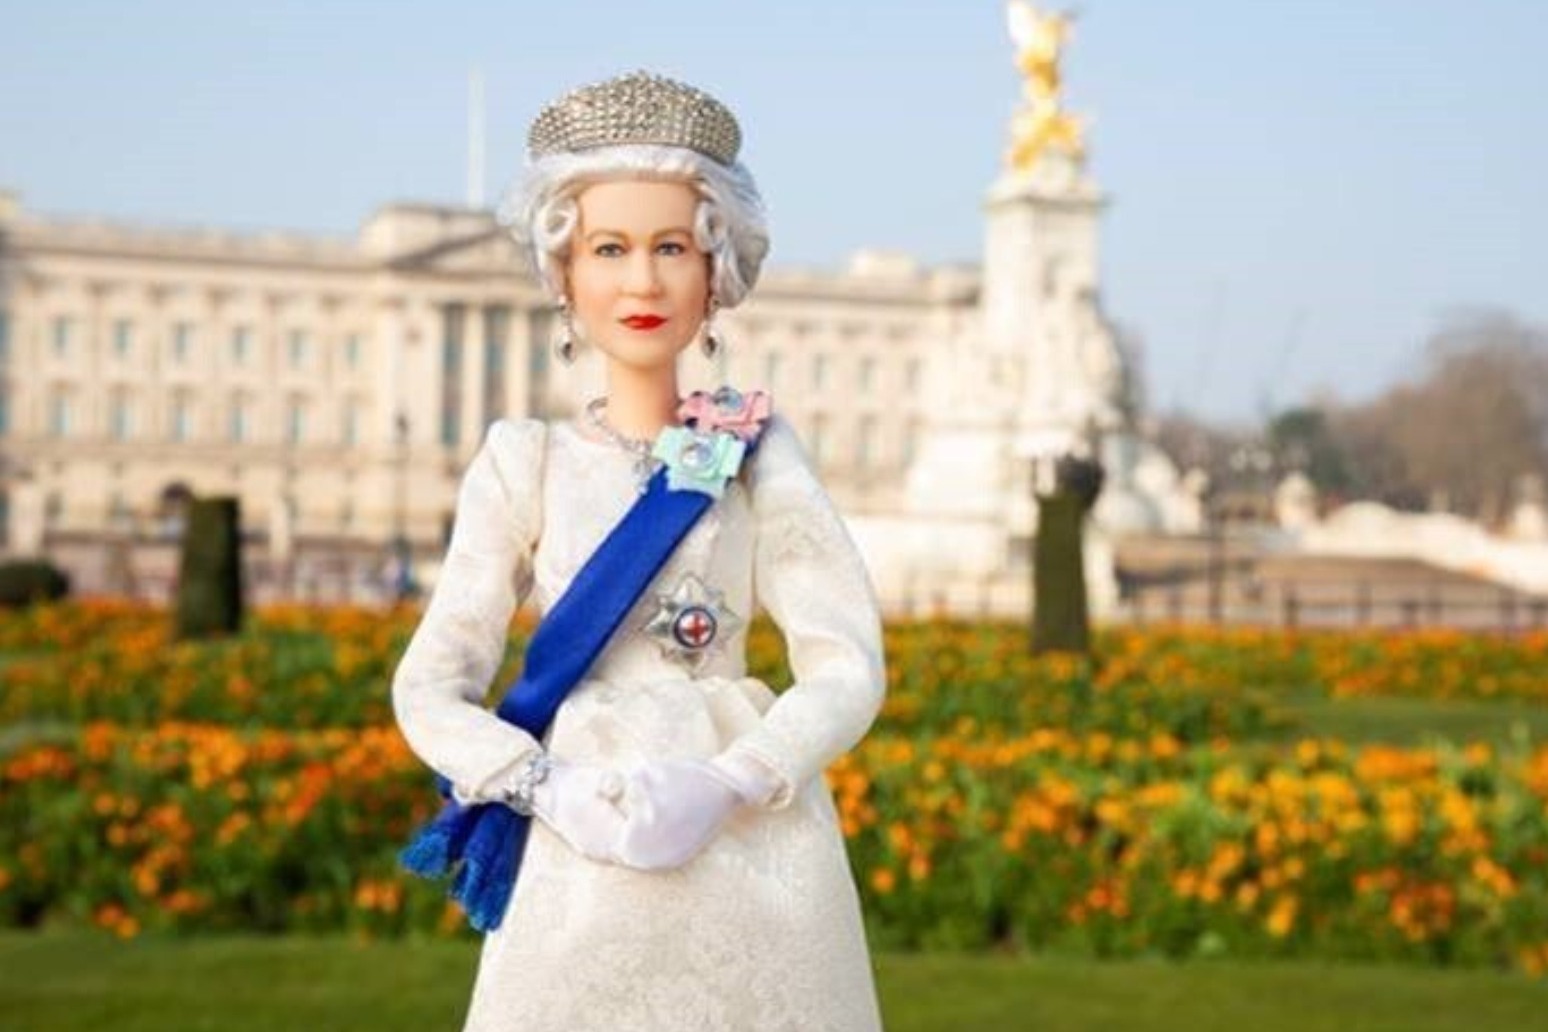 Barbie unveils limited-edition Queen doll to mark Platinum Jubilee 